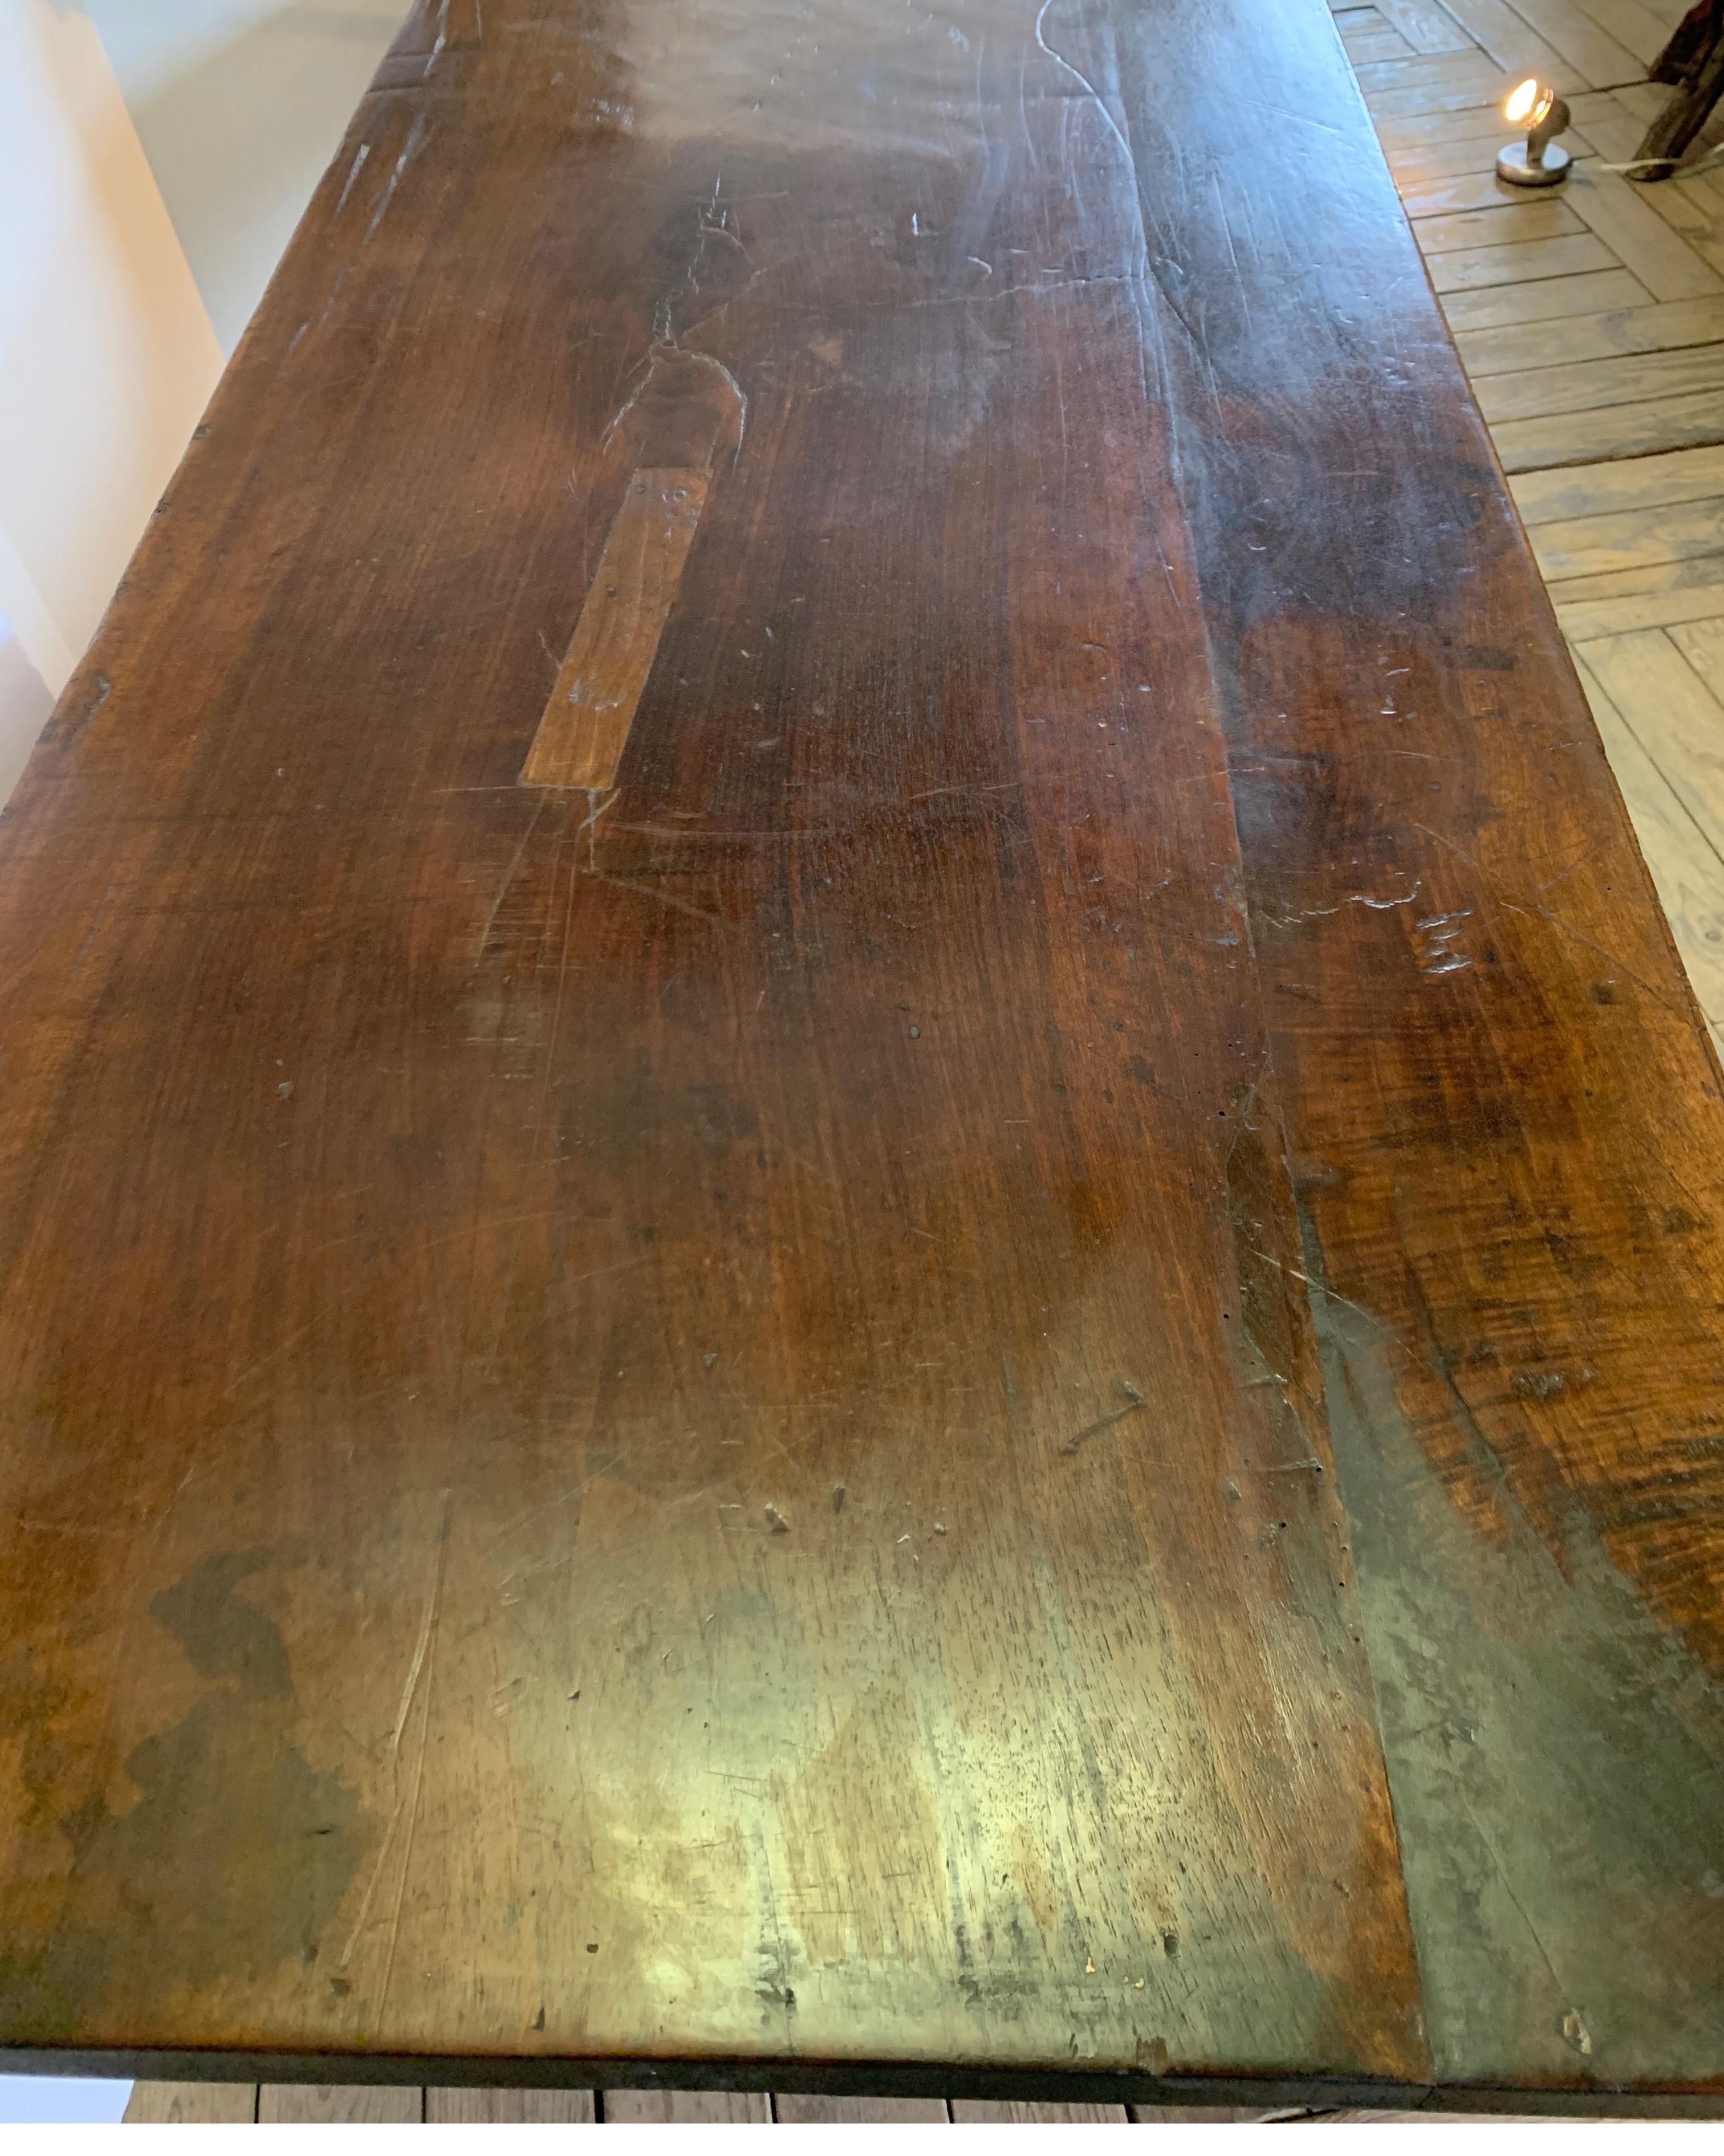 This handsome walnut table is a handsome very sturdy dining table. It has great character with several hand done repairs to the top which I have photographed for you to see up close. The color is a dark walnut and much prettier in person.